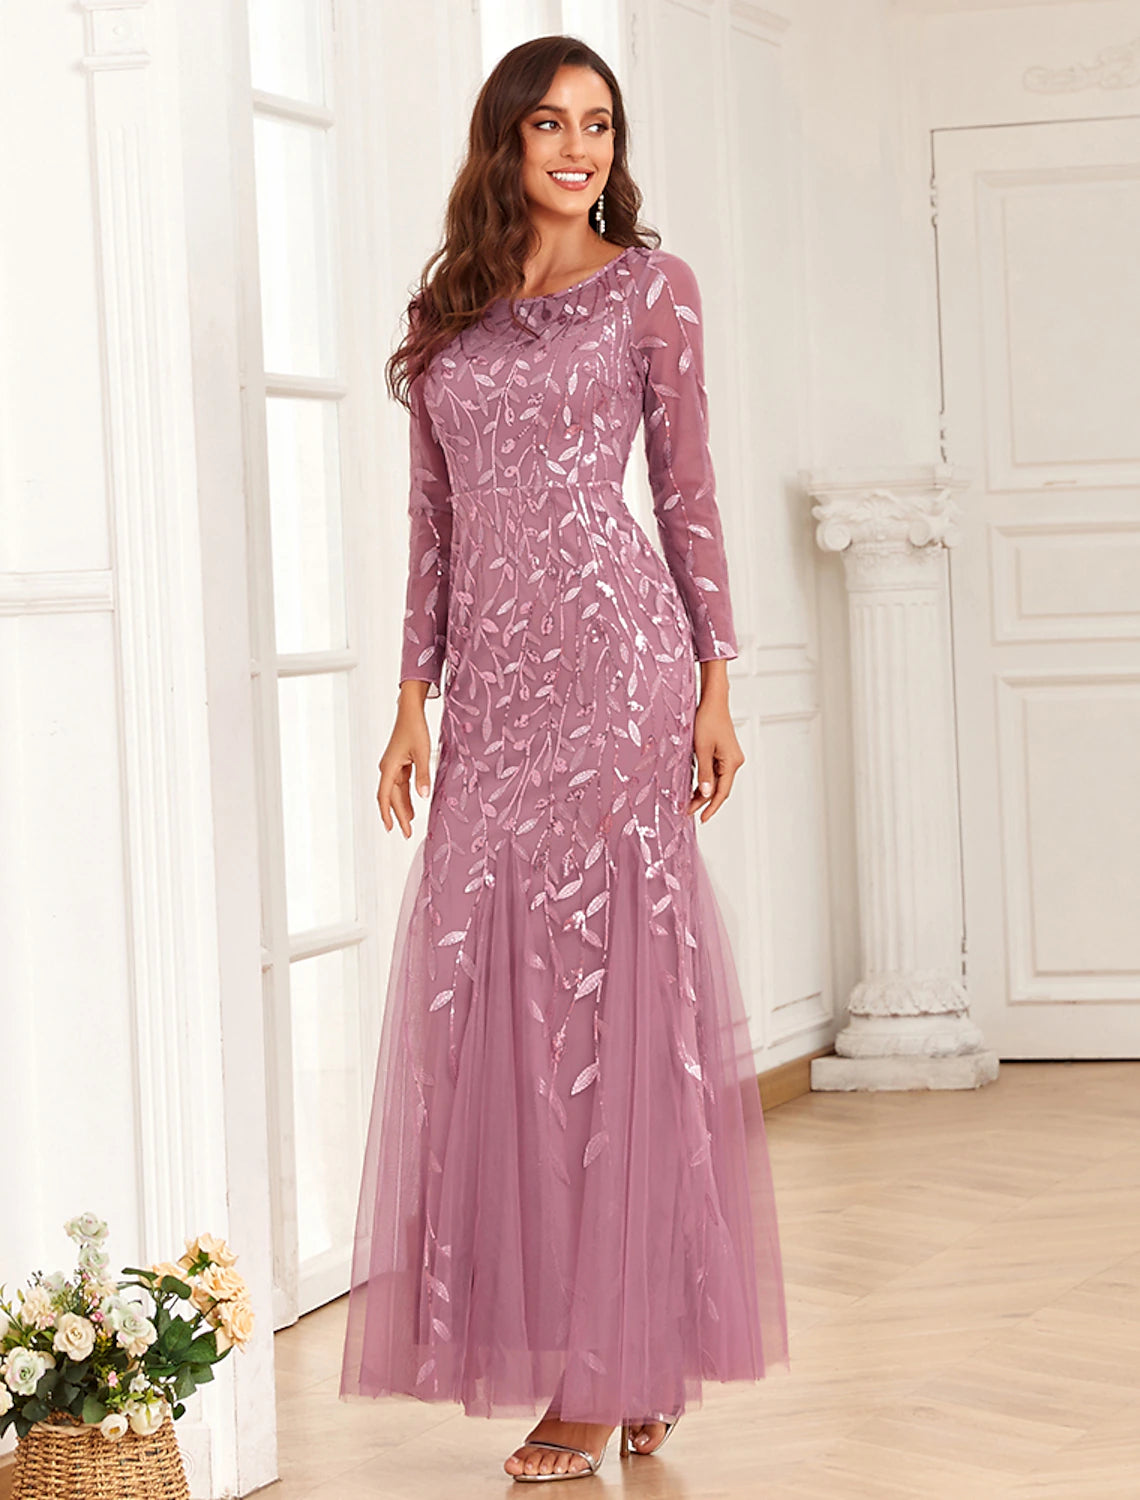 Mermaid / Trumpet Evening Gown Elegant Dress Wedding Guest Prom Floor Length Long Sleeve Jewel Neck Tulle with Embroidery